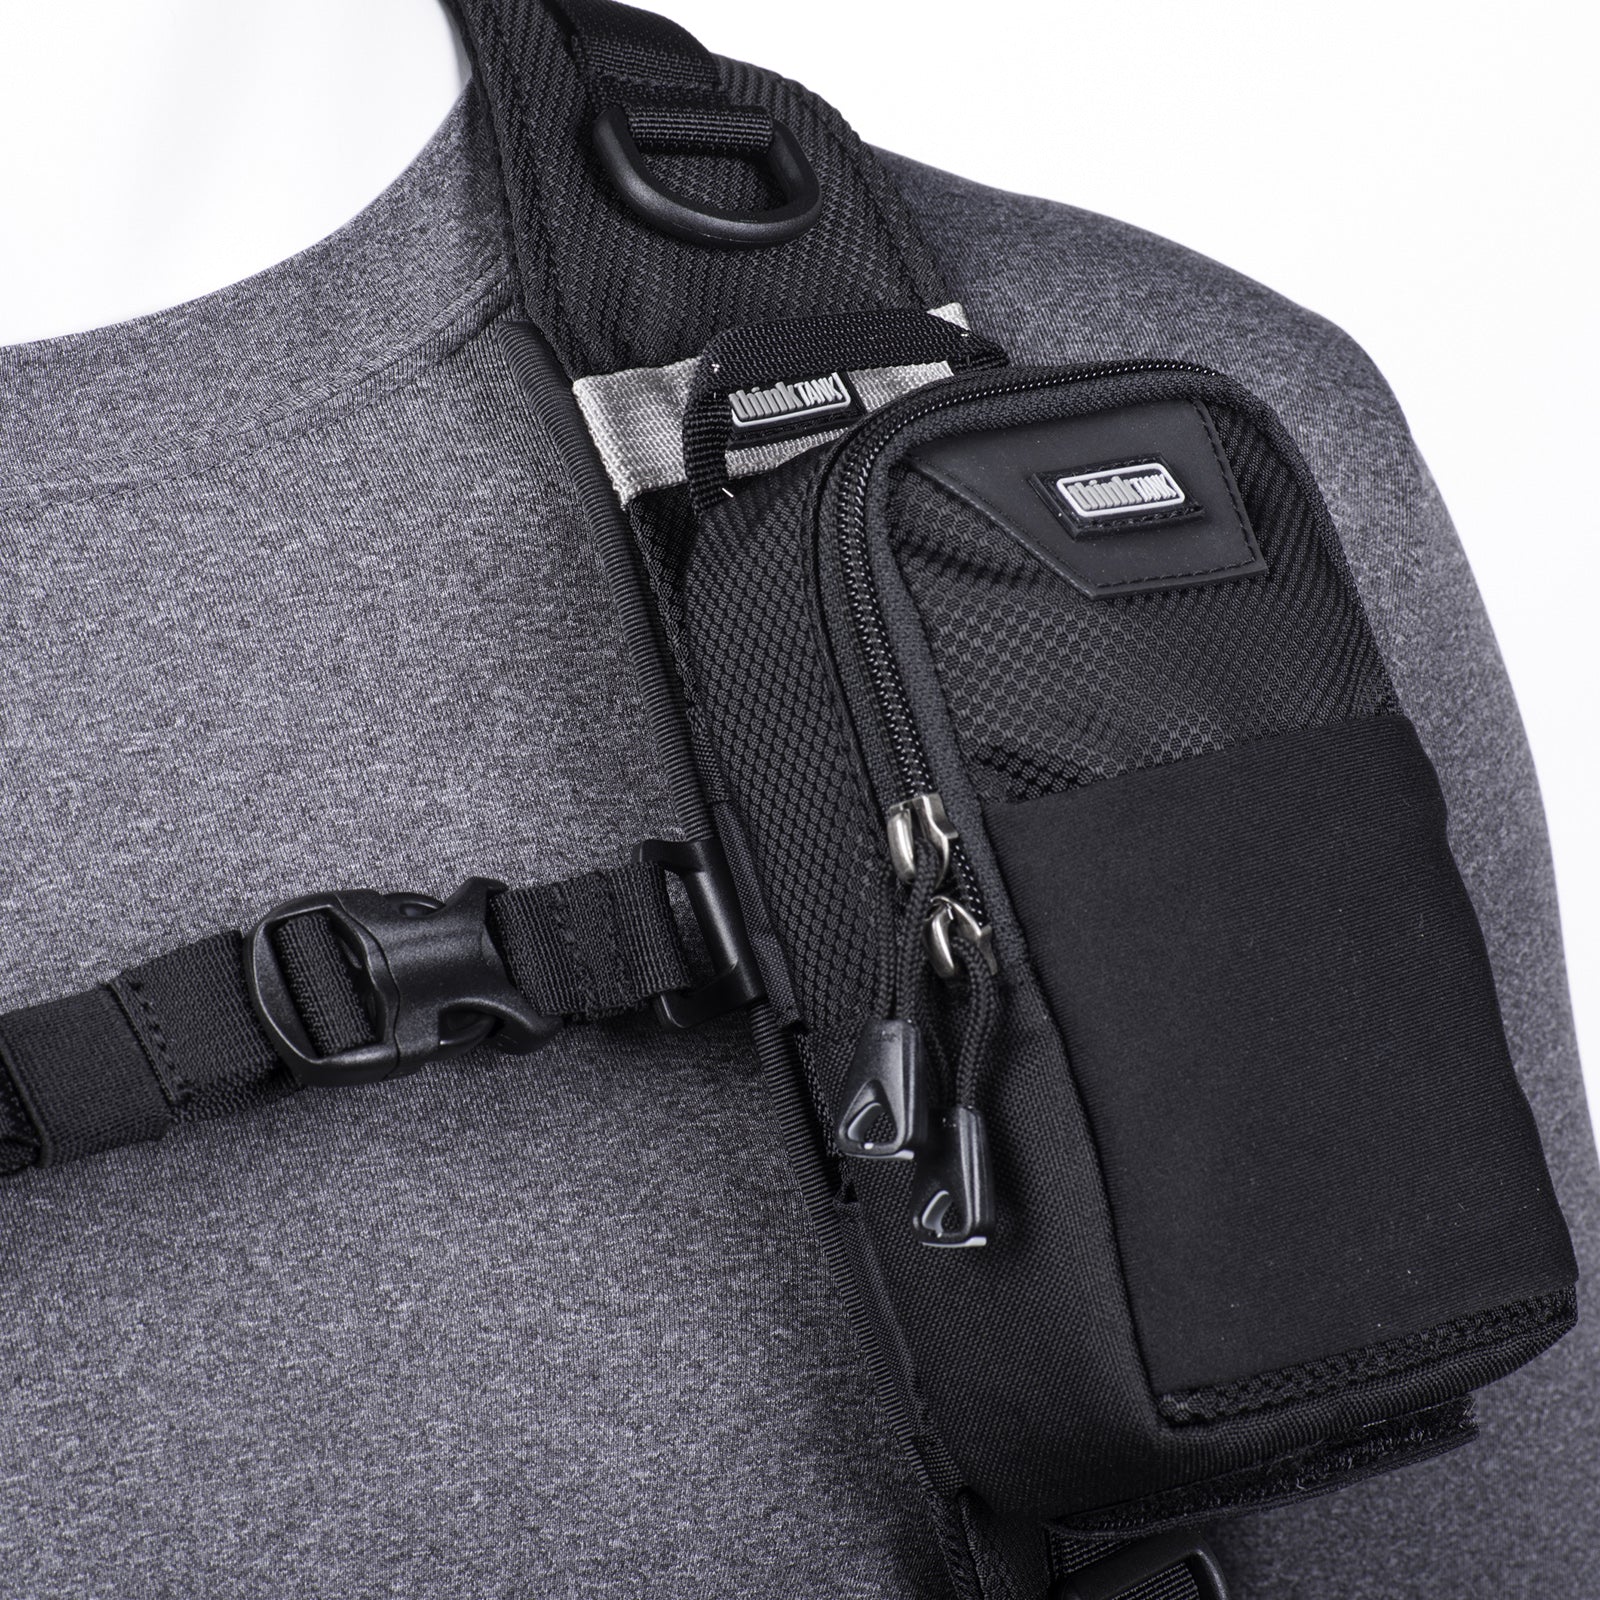 This compact pouch carries a smartphone, professional point and shoot camera, memory card wallet, or small accessories as part of the Think Tank Modular Belt System